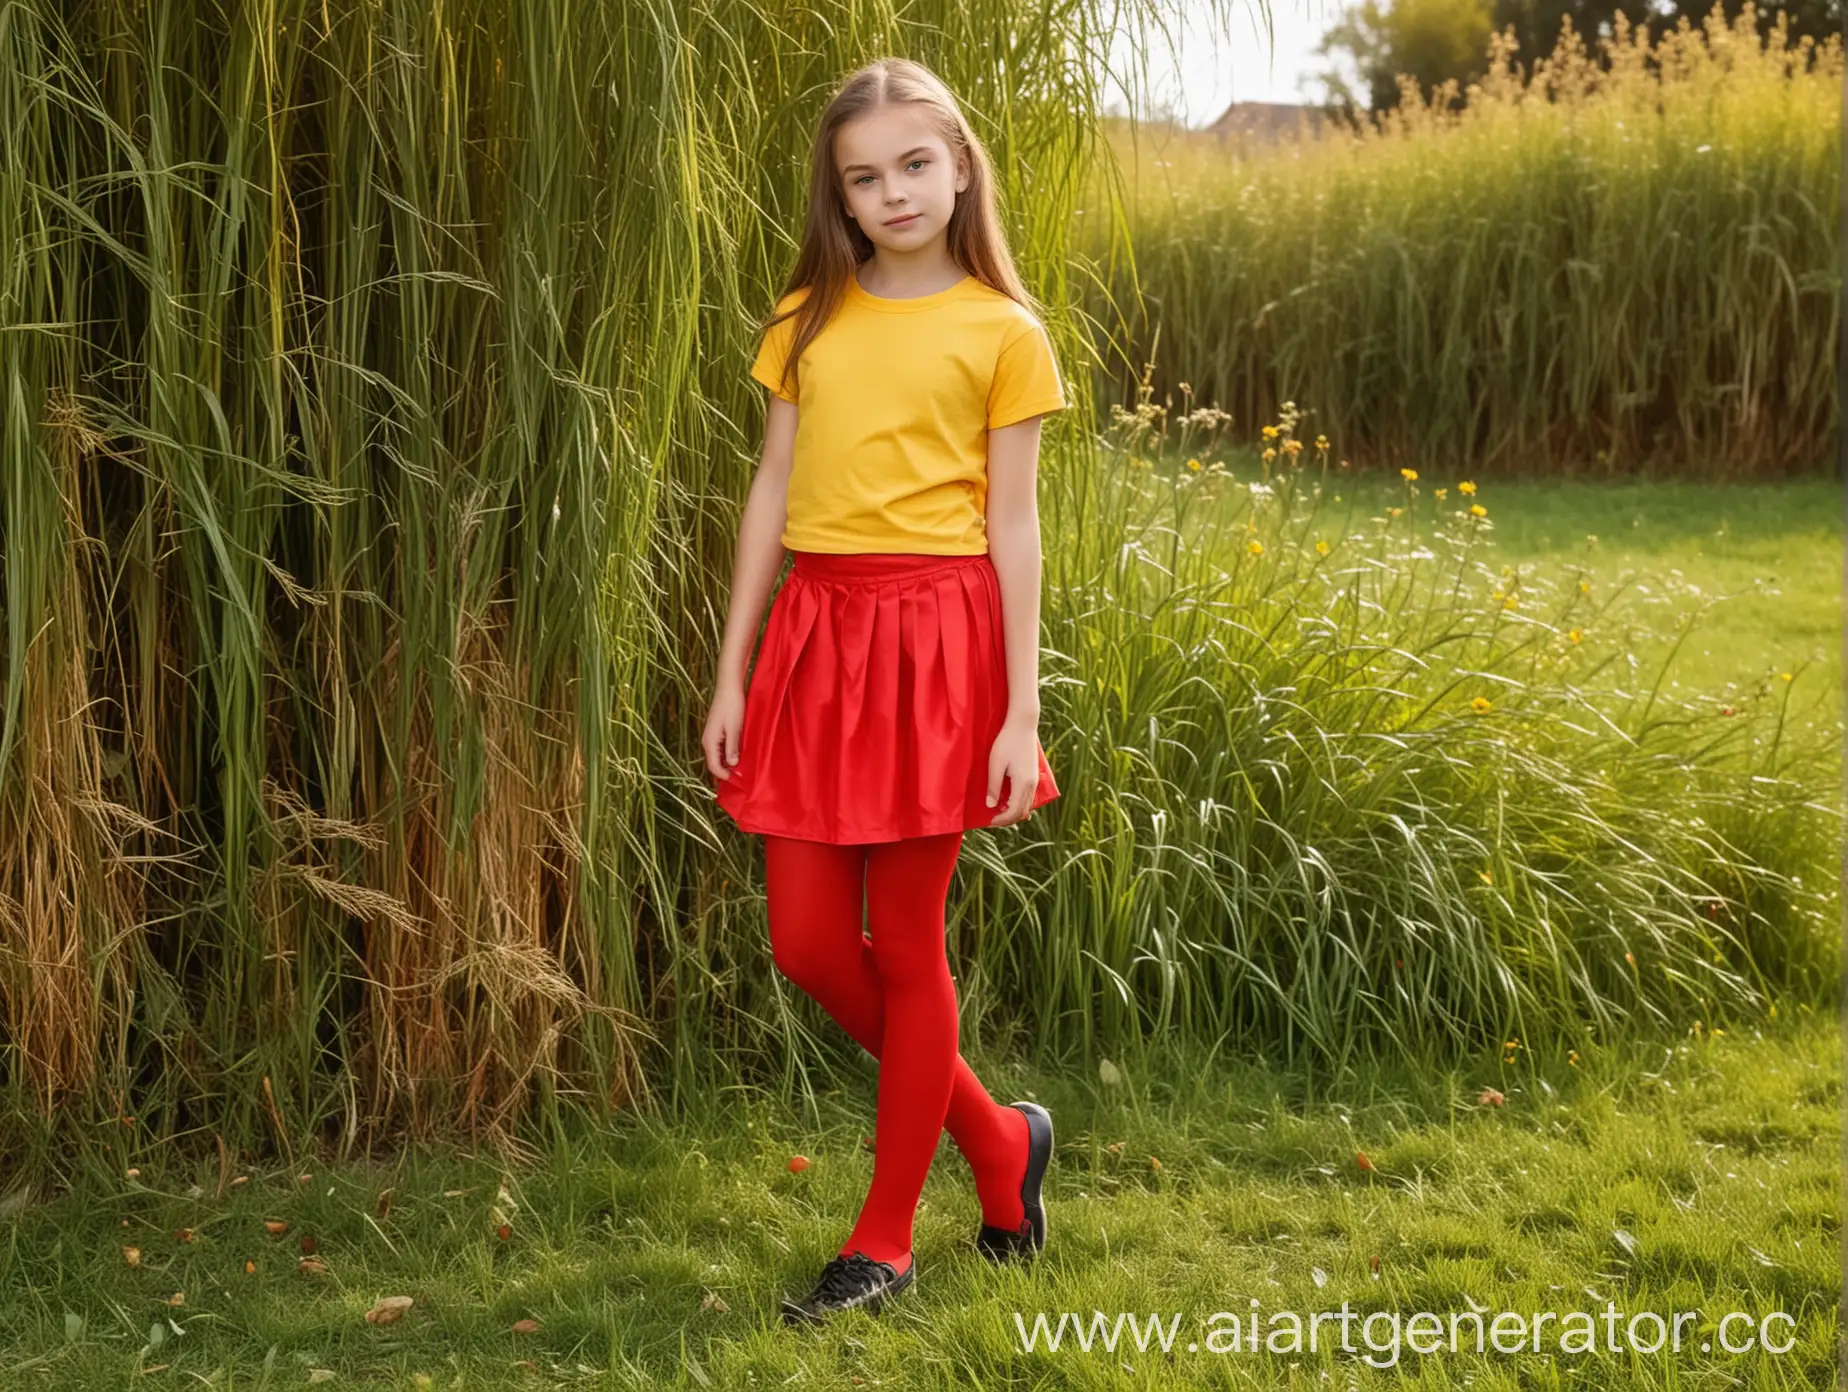 Twelve years old girl, dressed in red midi skirt with red tights and yellow t-shirt. Girl standing near the grass